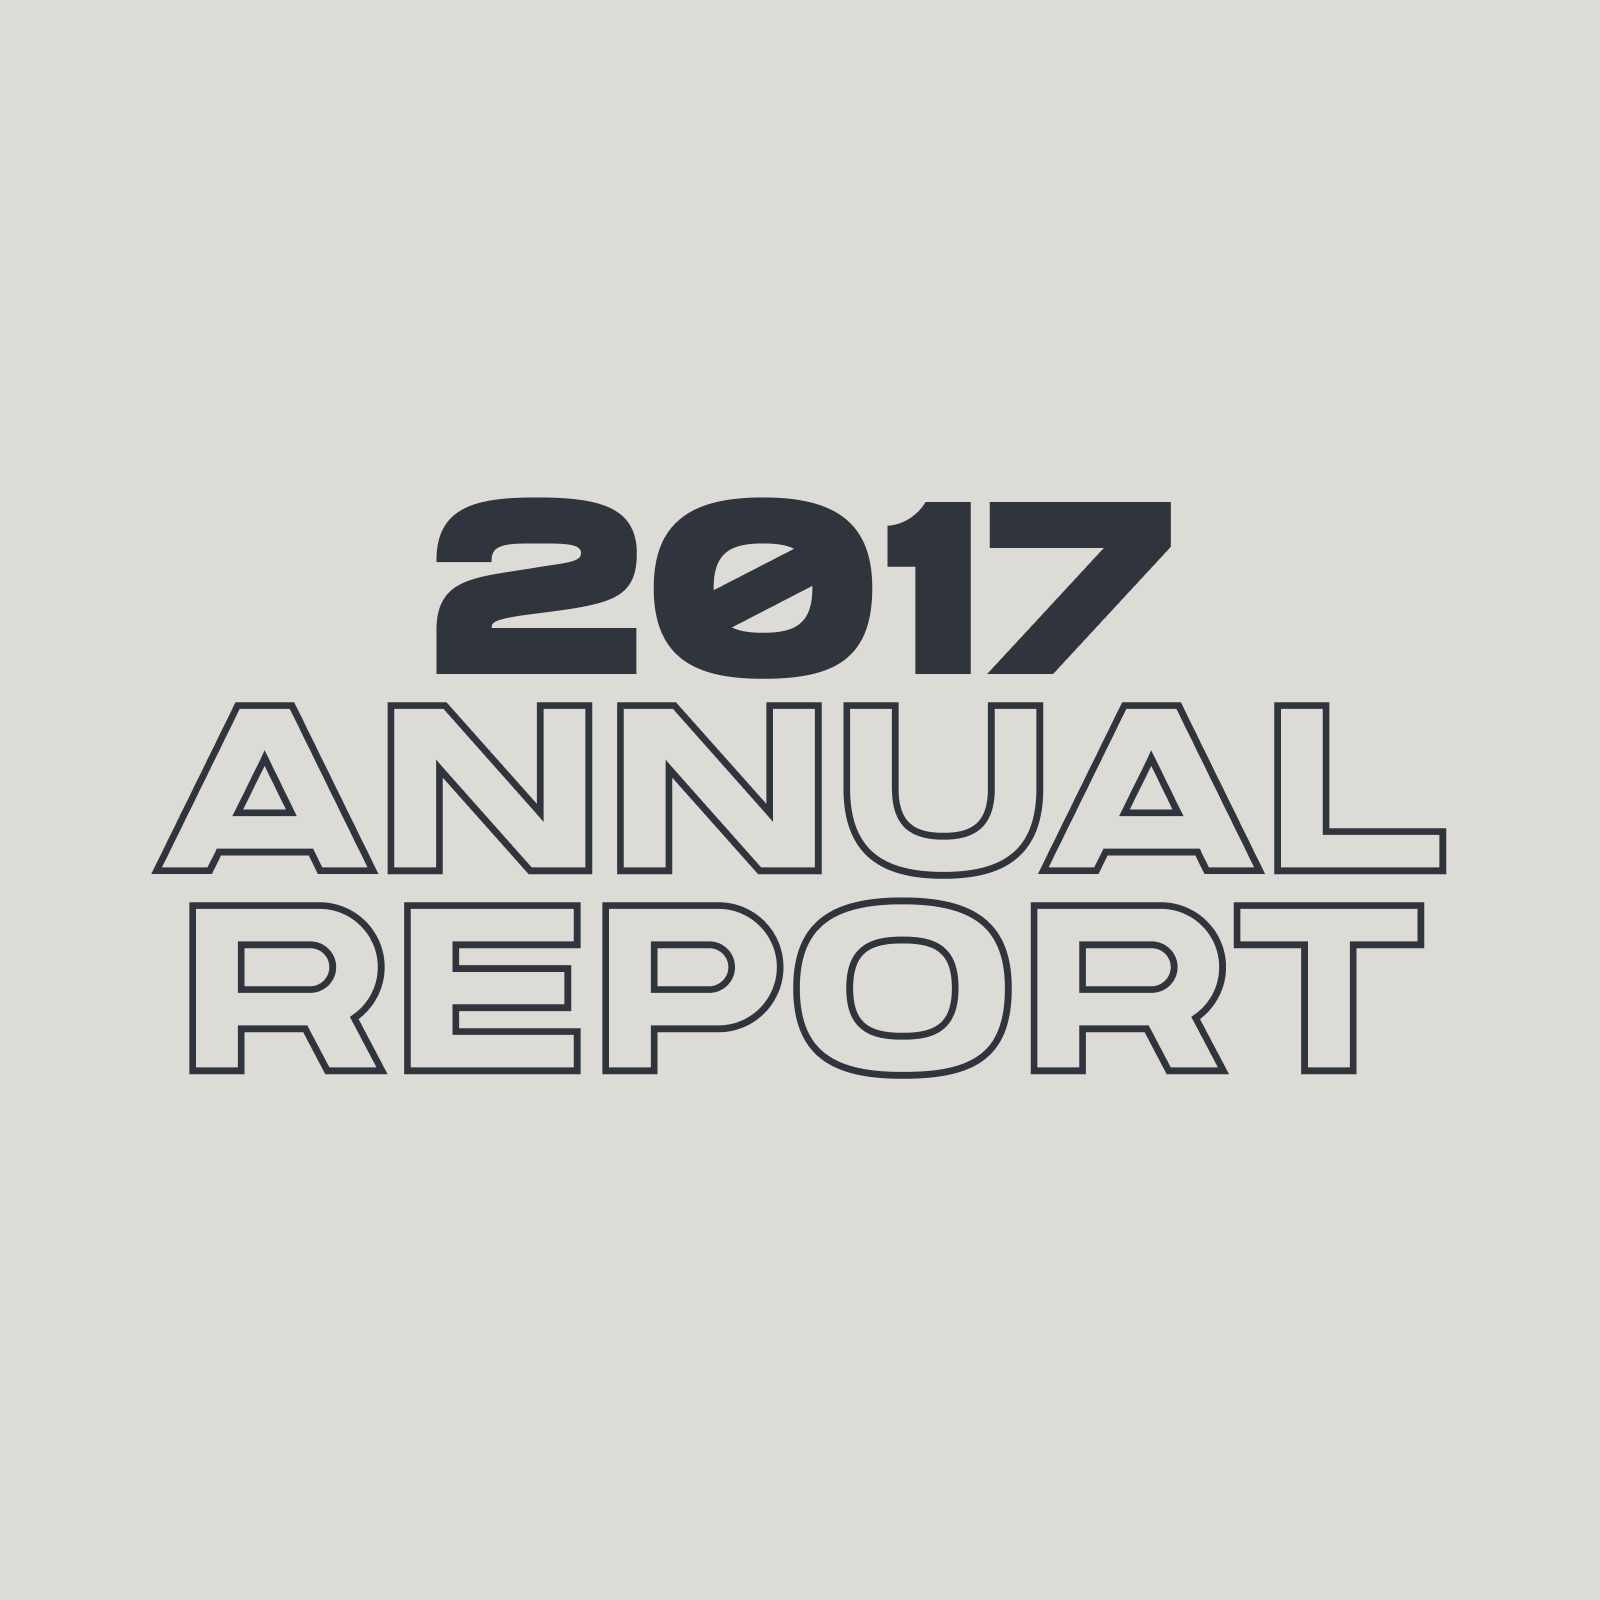 2017 Annual Report.png